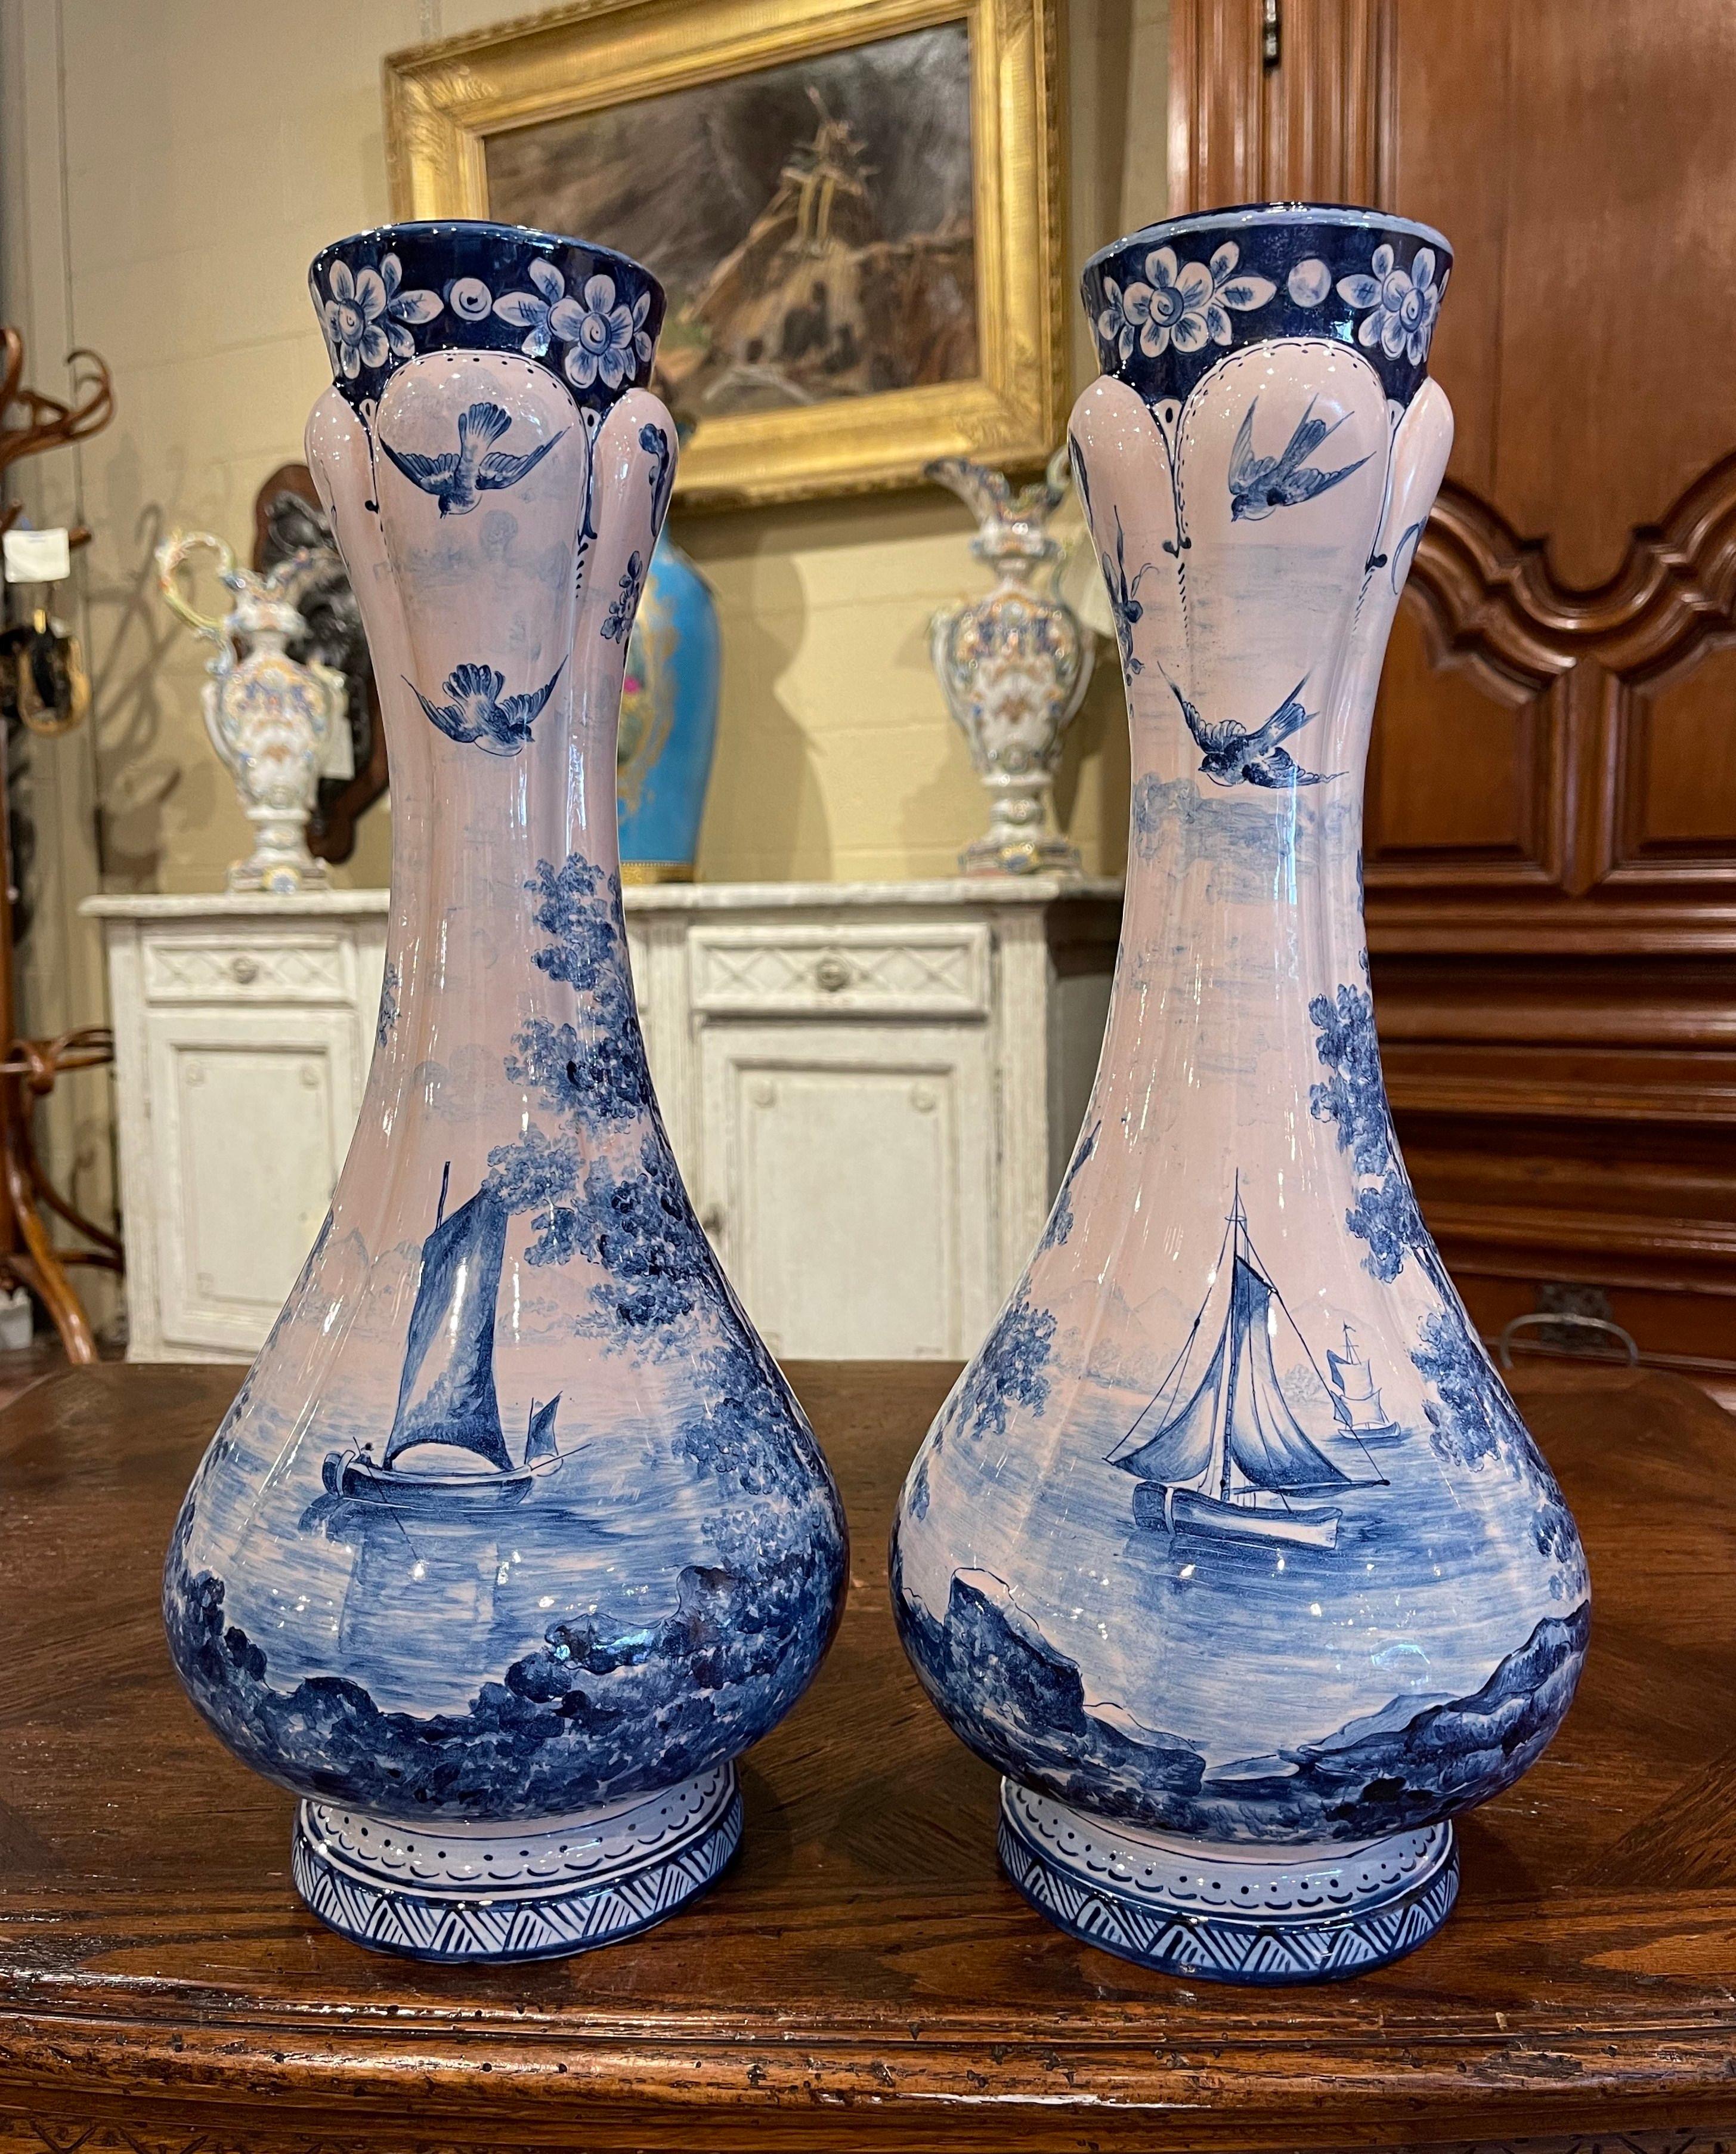 Pair of 19th Century French Delft Style Faience Vases with Blue and White Decor 1